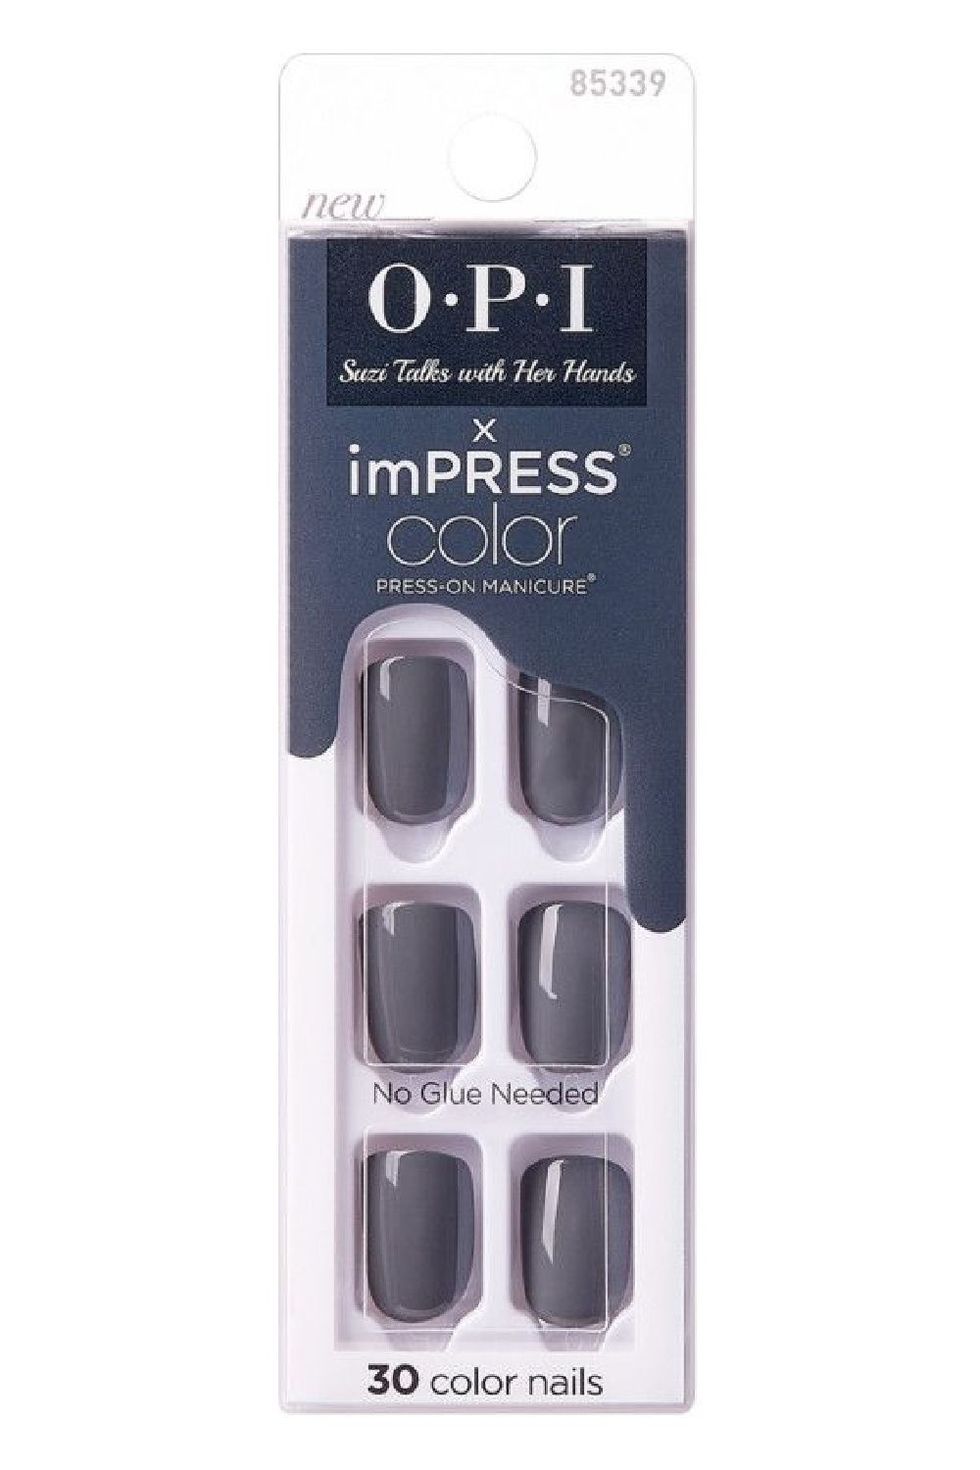 Kiss Suzi Talks With Her Hands imPRESS Color X OPI Press-On Manicure